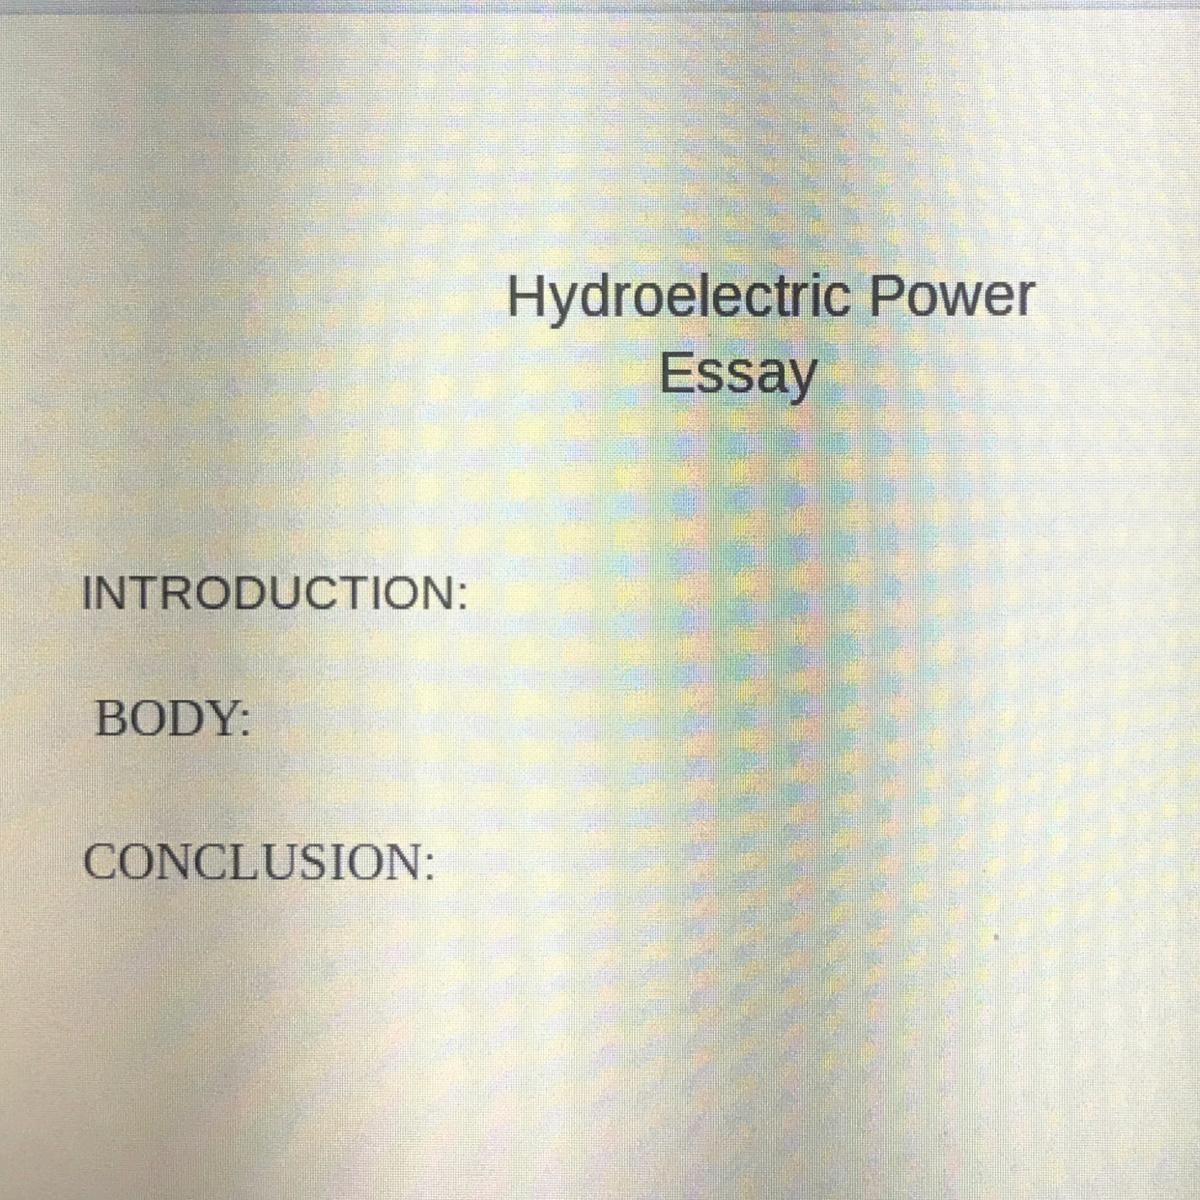 Can Anyone Help Me Write Hydroelectric Essay INTRODUCTION:BODY:CONCLUSION:Please I Really Have Bad Life